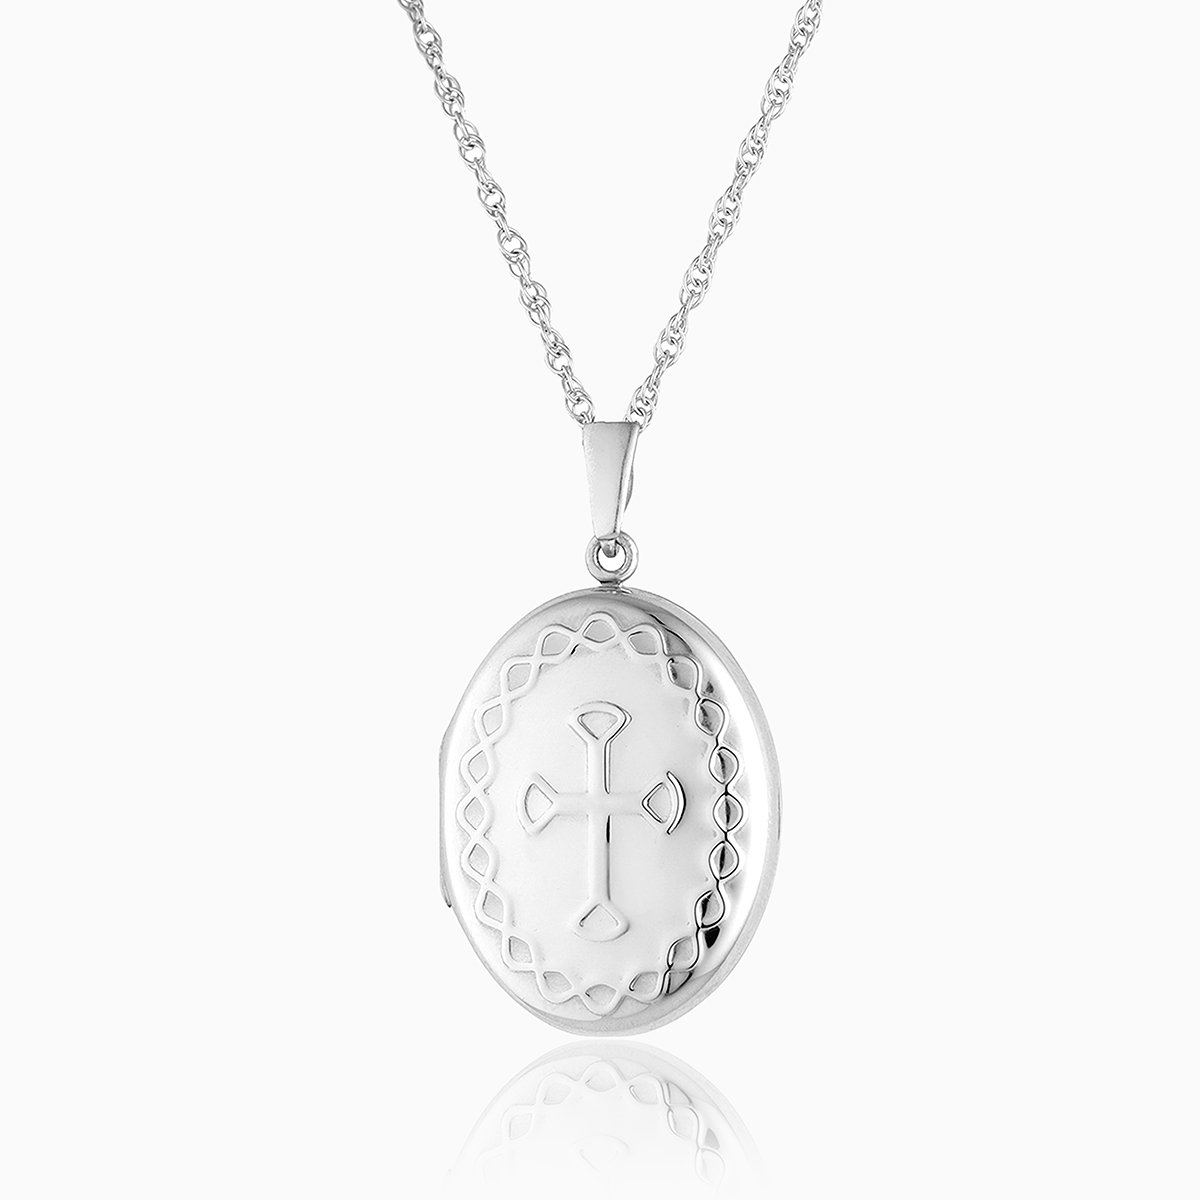 Product title: Large Silver Celtic Cross, product type: Locket